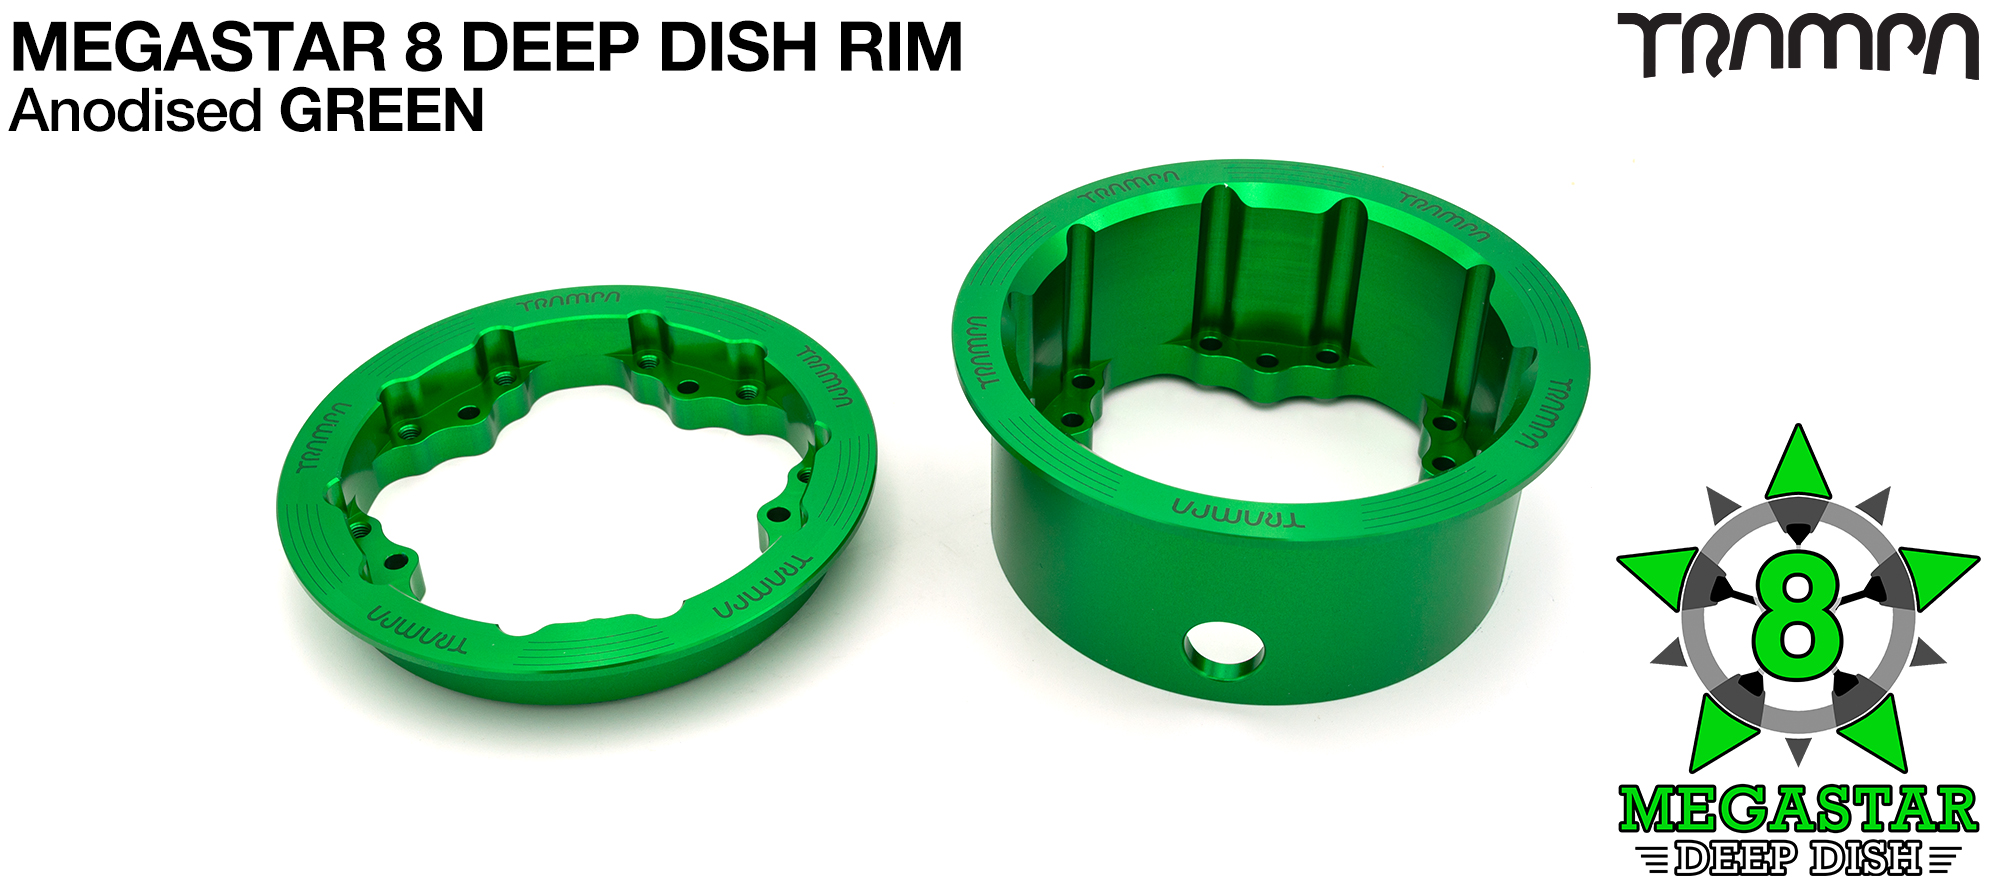 MEGASTAR 8 DEEP-DISH Rims Measure 3.75 x 2.5 Inch. The bearings are positioned OFF-SET widening the wheel base & accept all 3.75 Rim Tyres - GREEN 